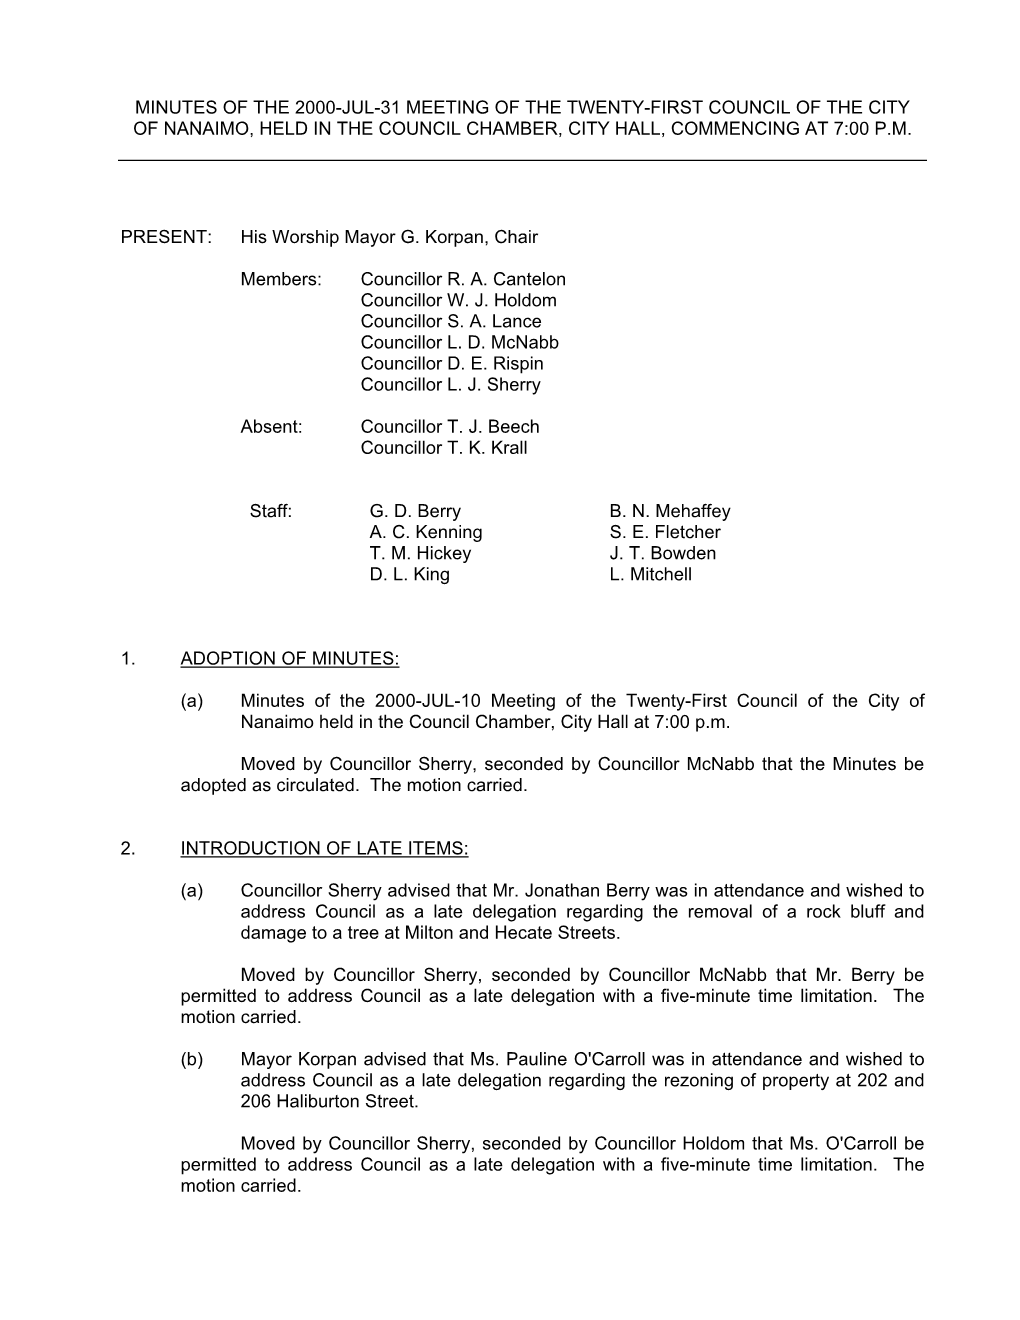 Council Minutes for July 31, 2000